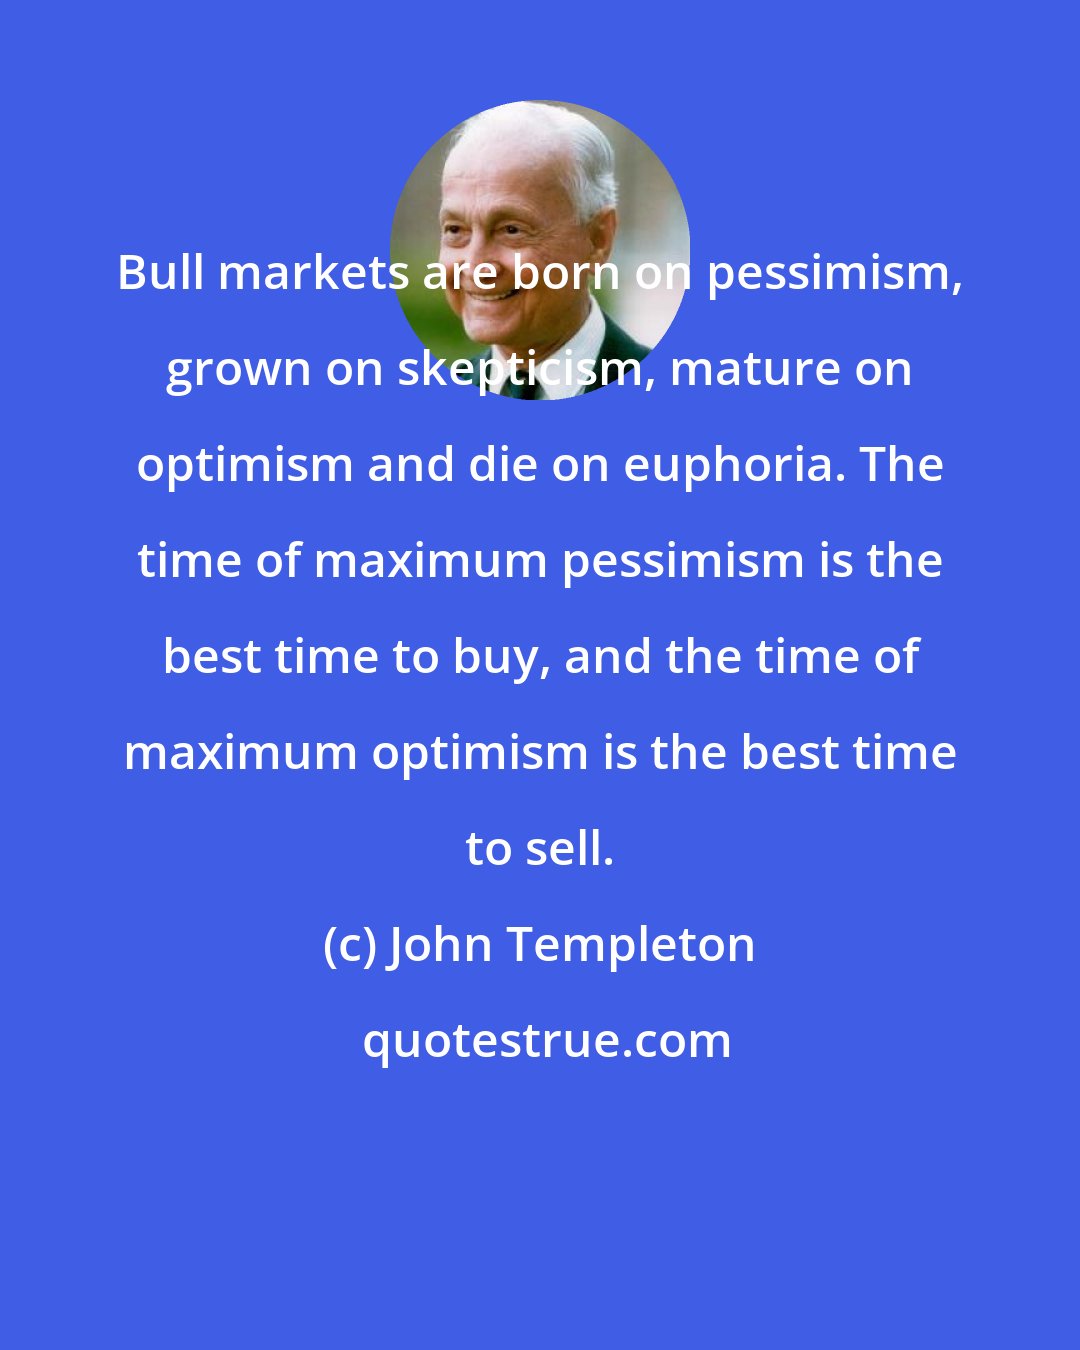 John Templeton: Bull markets are born on pessimism, grown on skepticism, mature on optimism and die on euphoria. The time of maximum pessimism is the best time to buy, and the time of maximum optimism is the best time to sell.